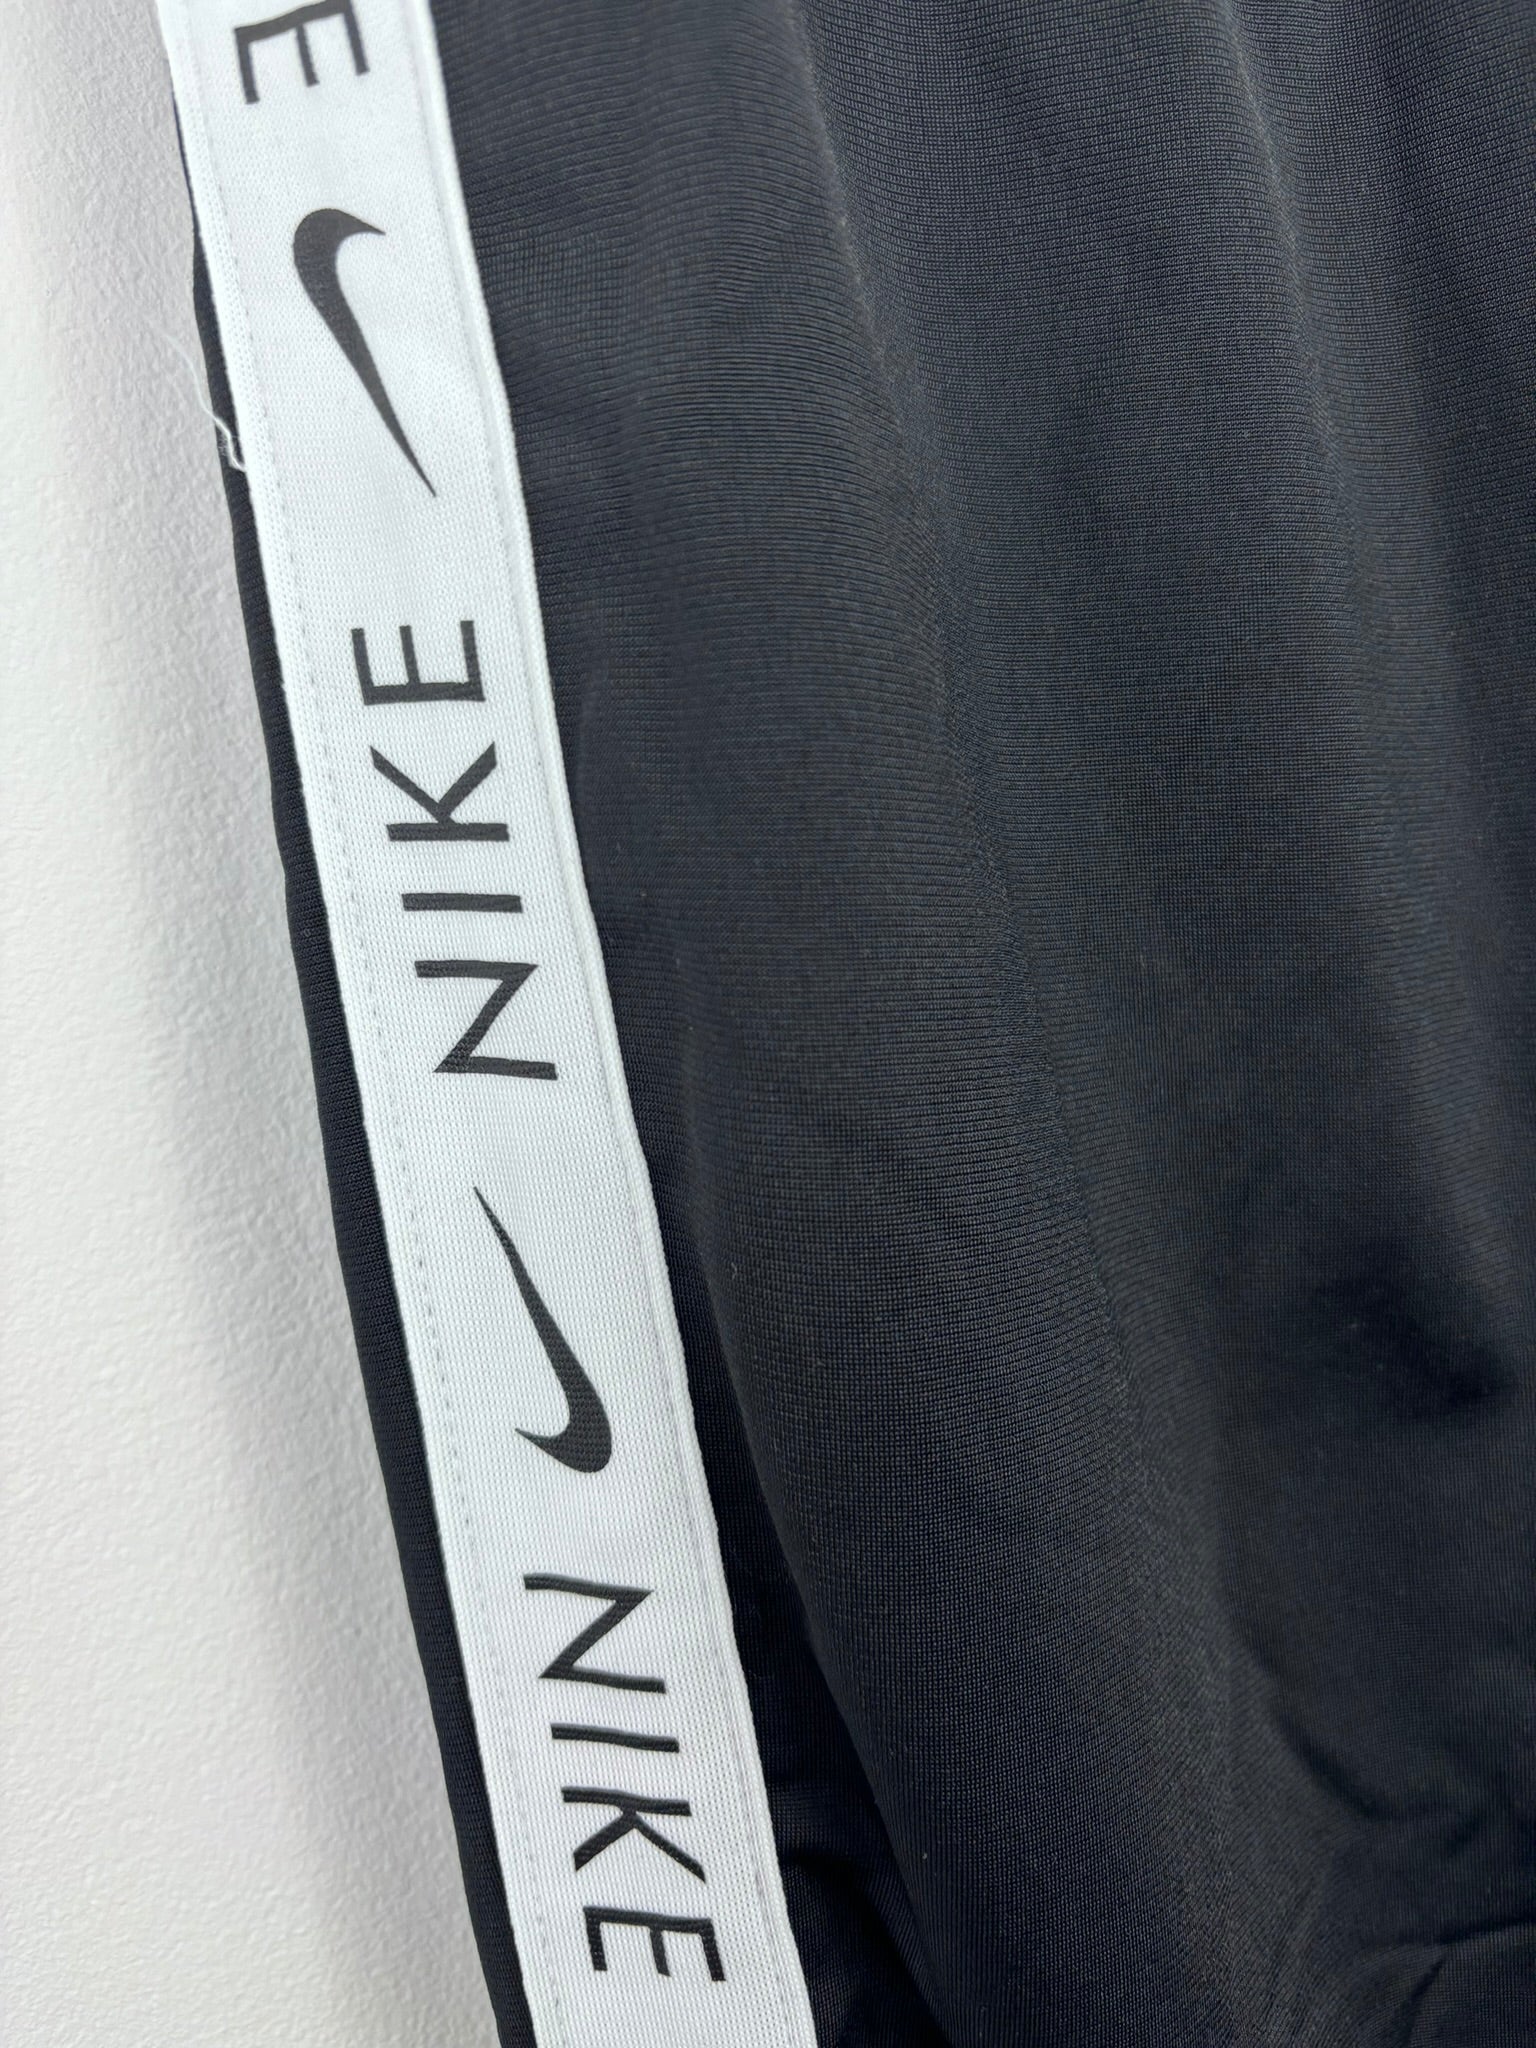 Nike Medium + (10-12 + Years)-Trousers-Second Snuggle Preloved